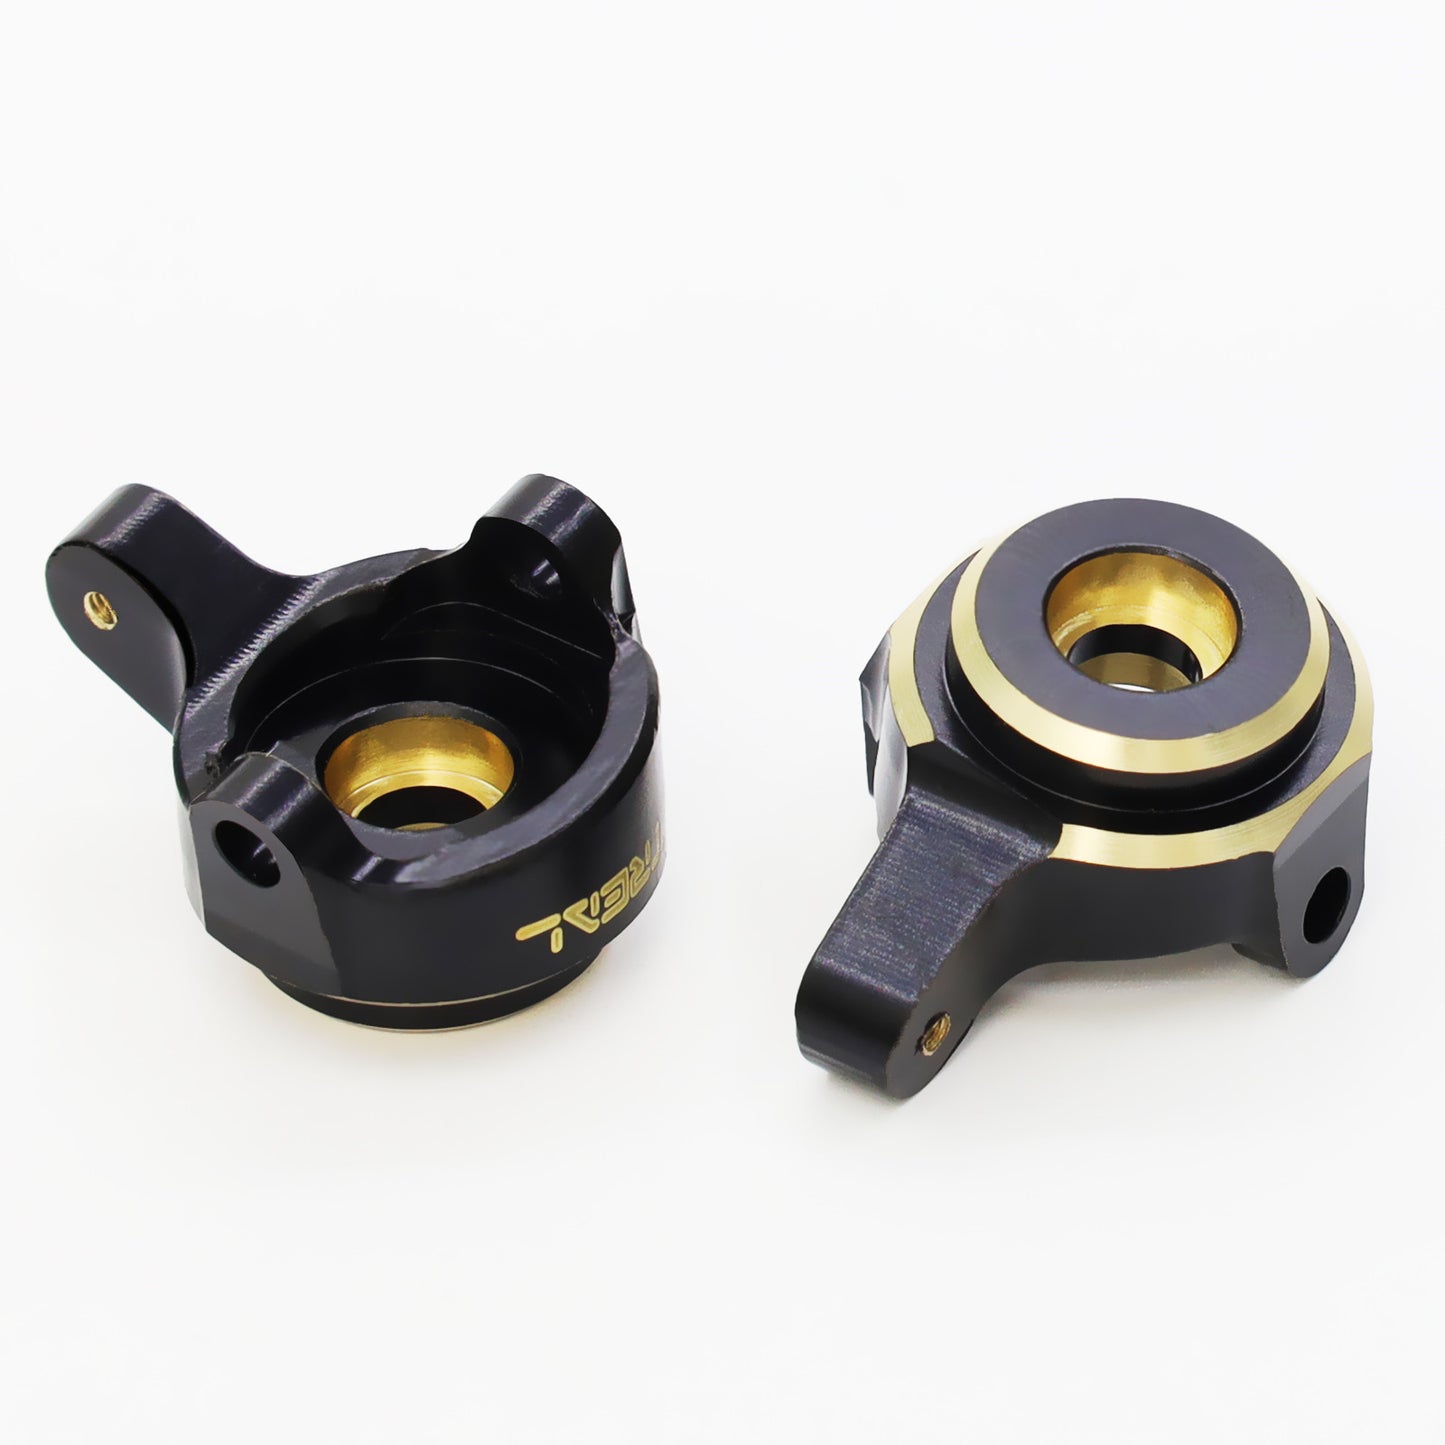 Treal Axial SCX24 Brass Front Steering Knuckles 10g for SCX24 Deadbolt C10 Betty Gladiator Bronco